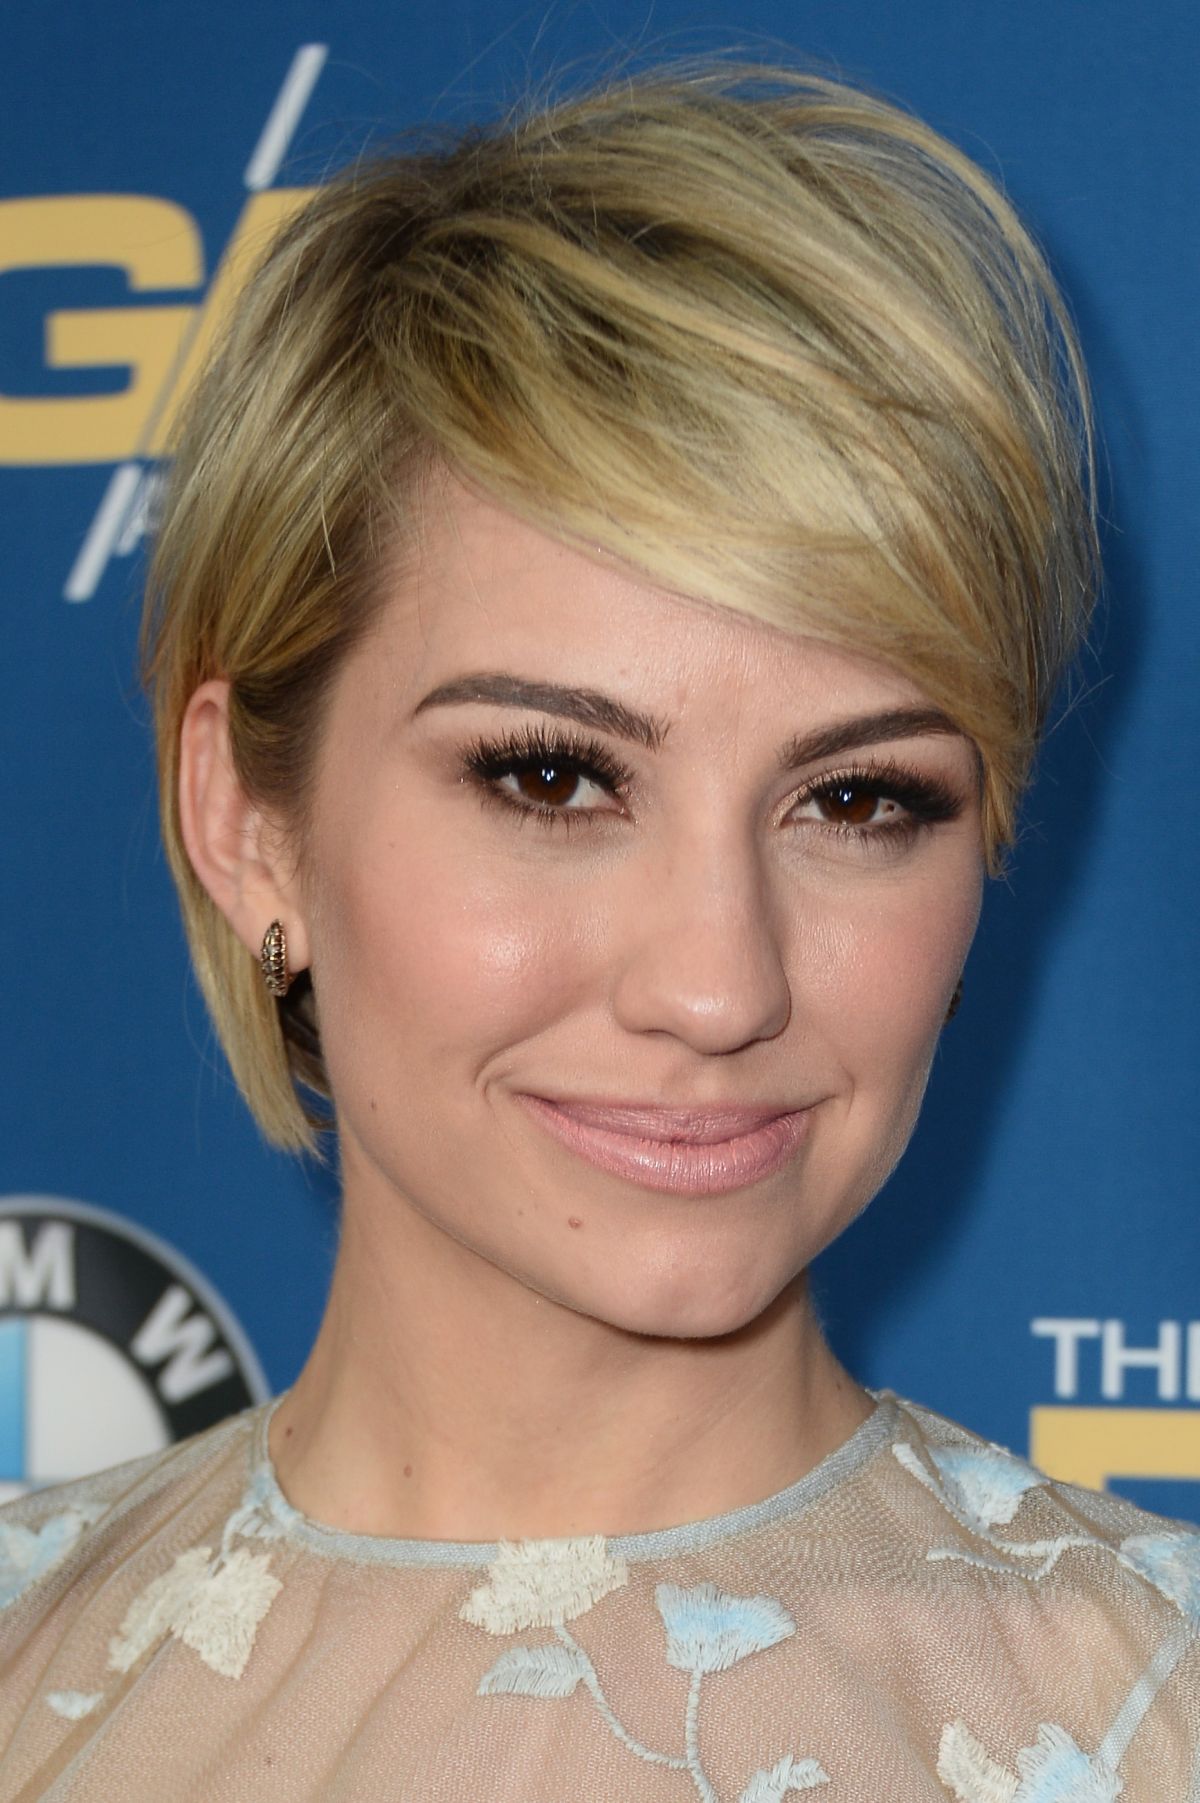 CHELSEA KANE at 2014 Directors Guild of America Awards in Century City ...